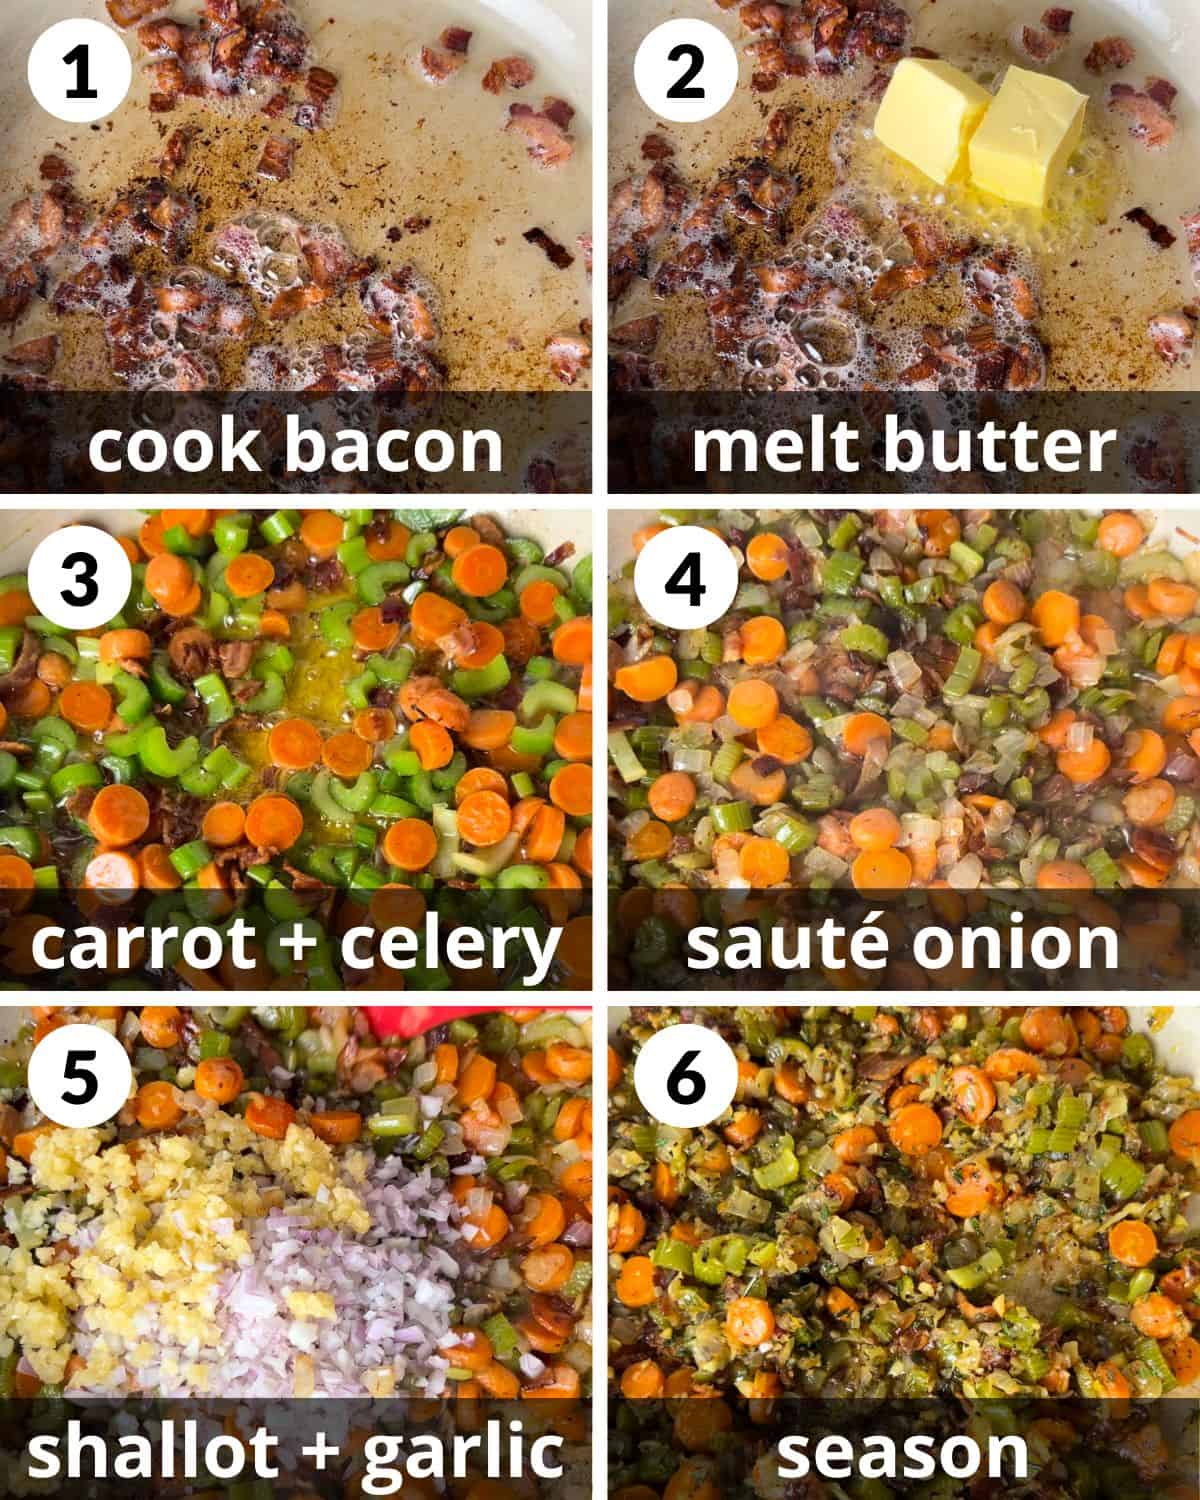 A 6 photo collage showing the assembly of chicken pot pie with puff pastry. 